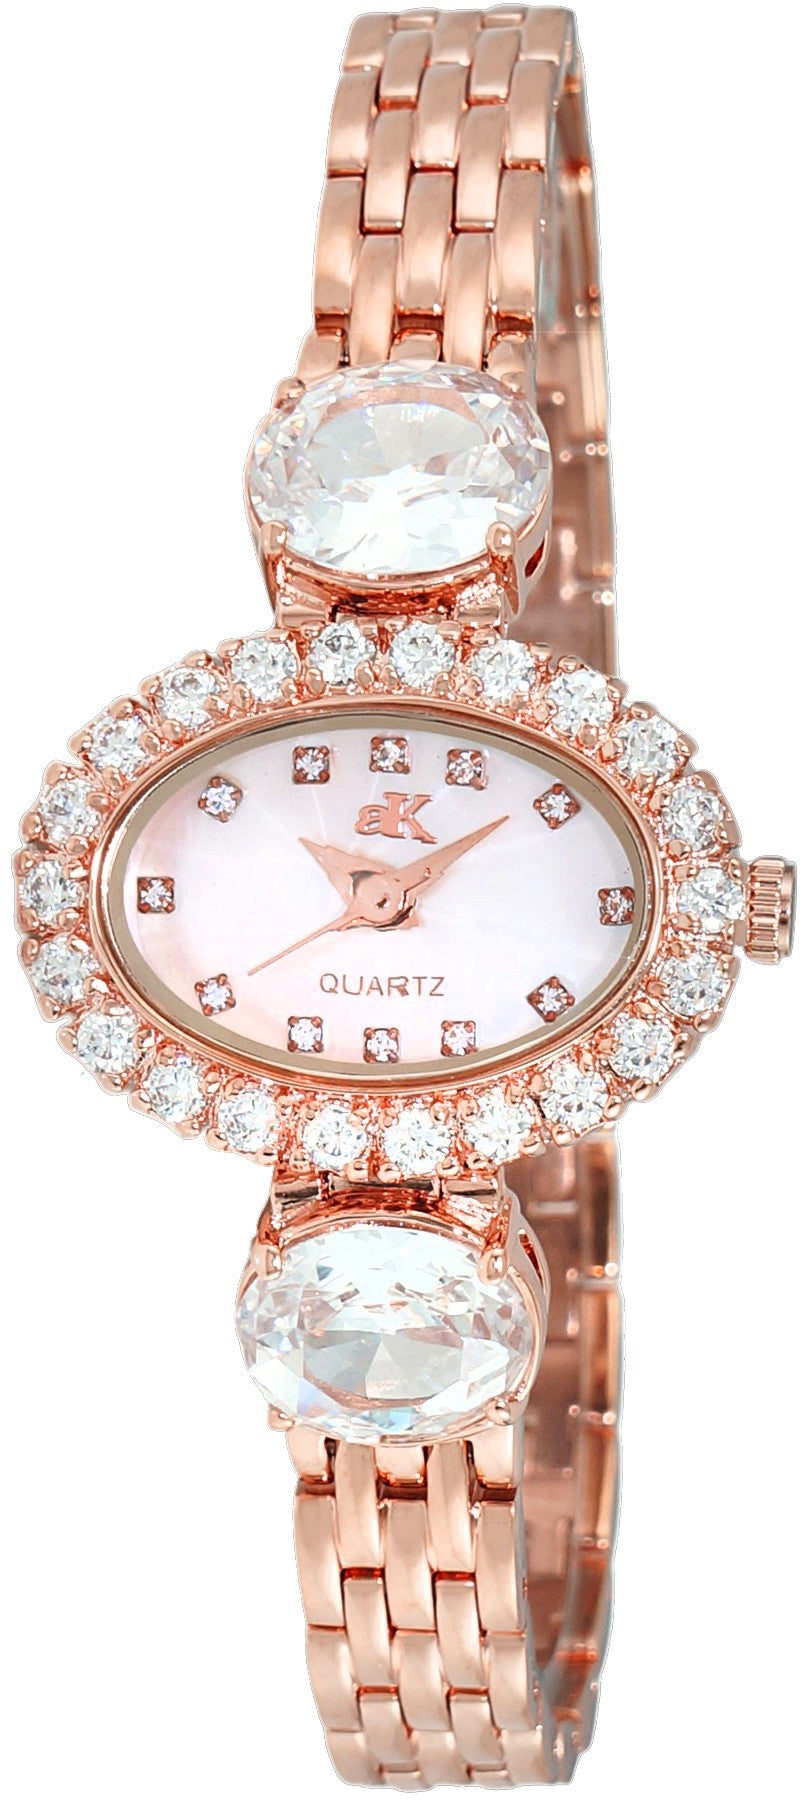 Adee Kaye Fancy Collection Crystal Accents Mother Of Pearl Dial Quartz Ak2730-r Women's Watch